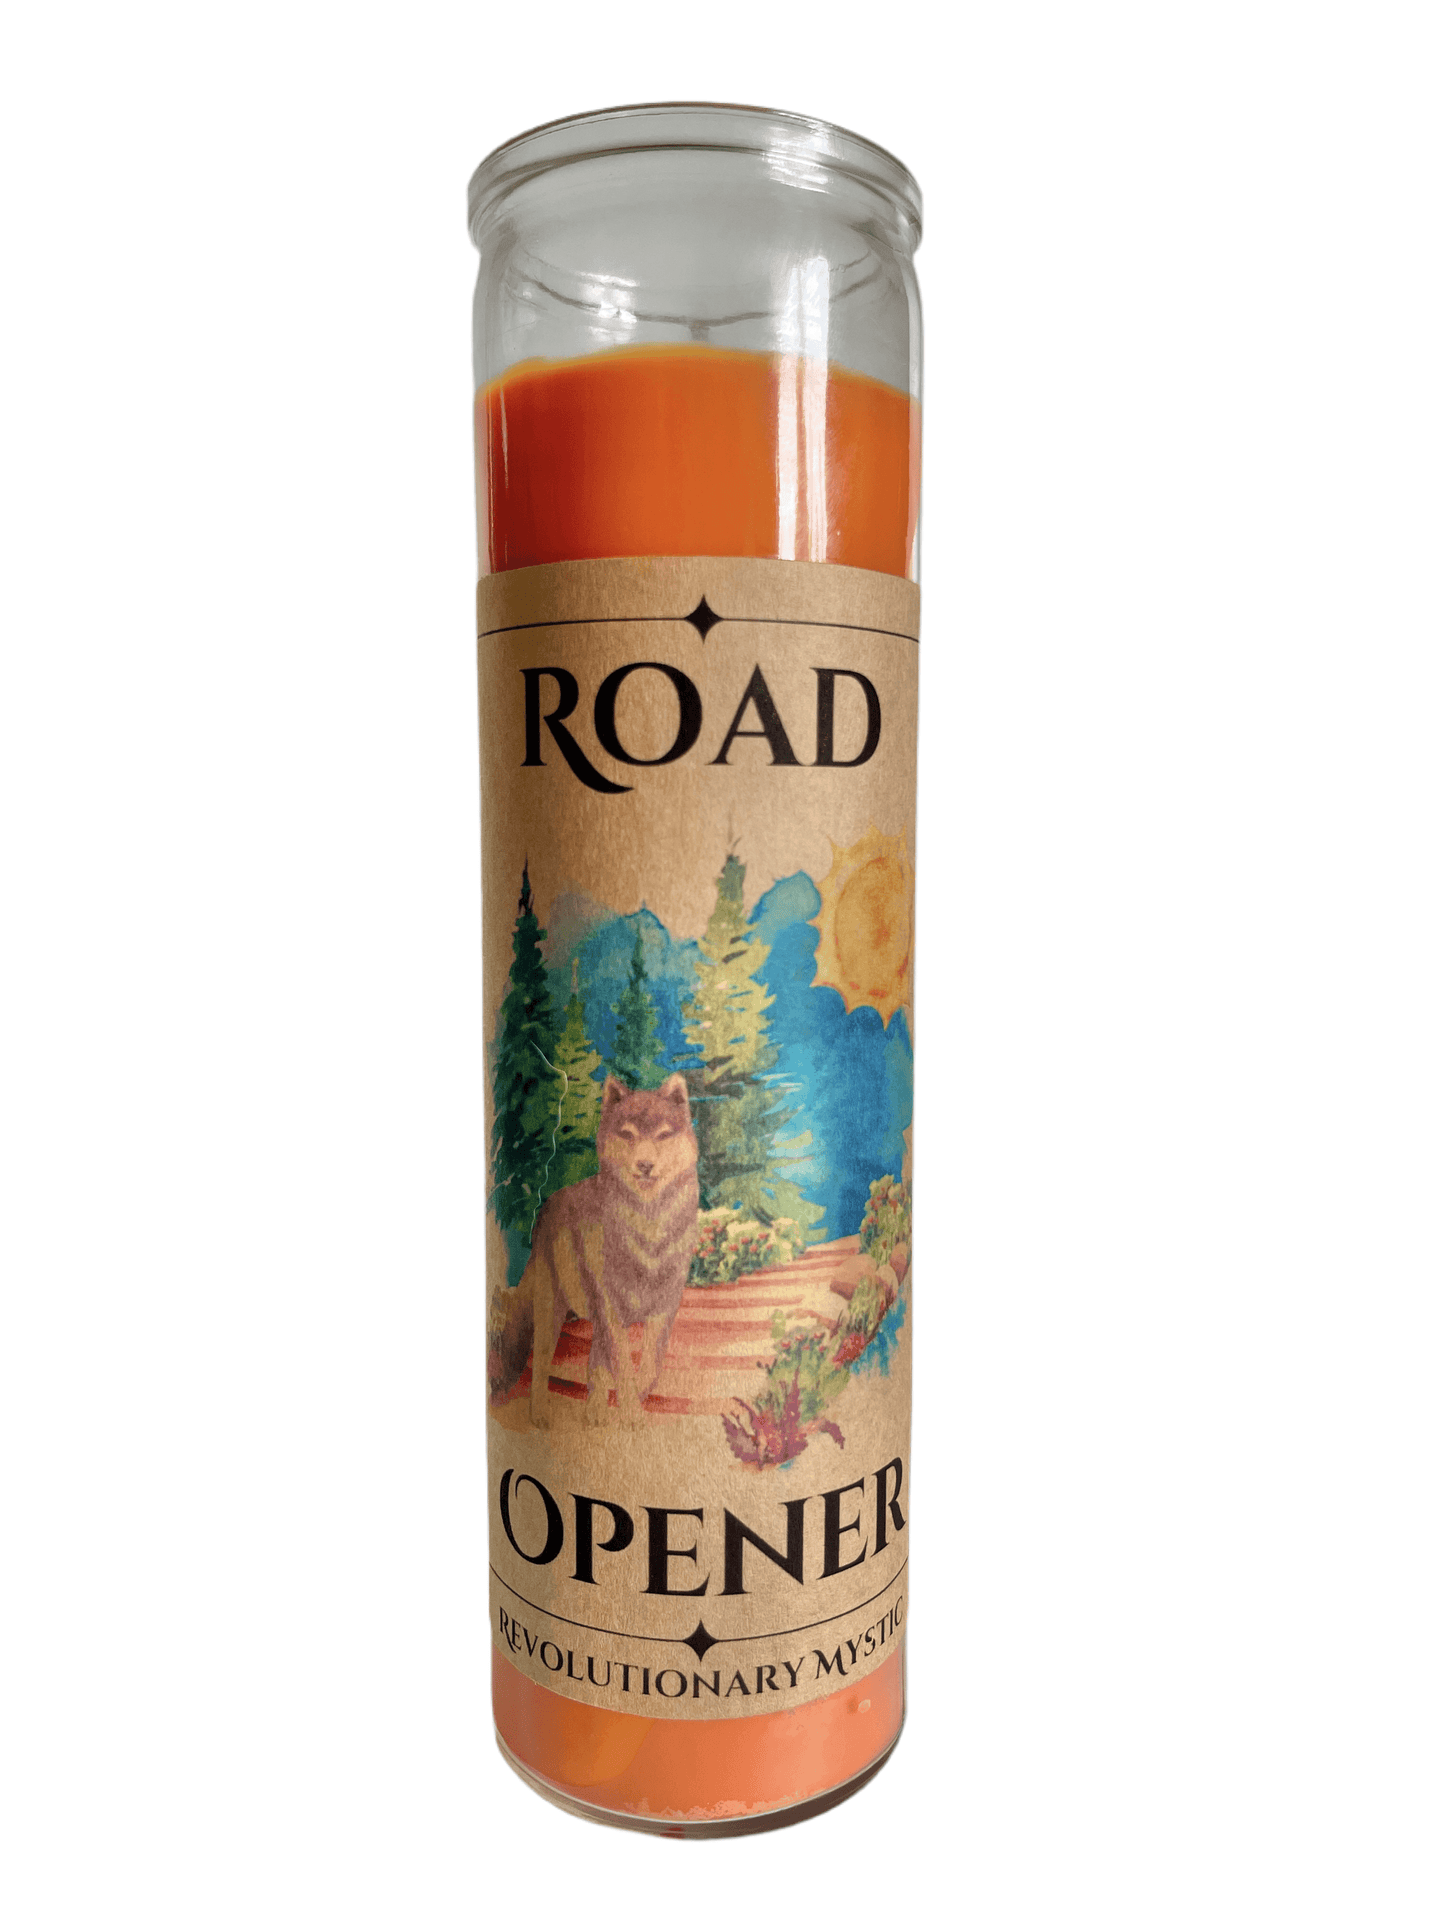 Road Opener Candle